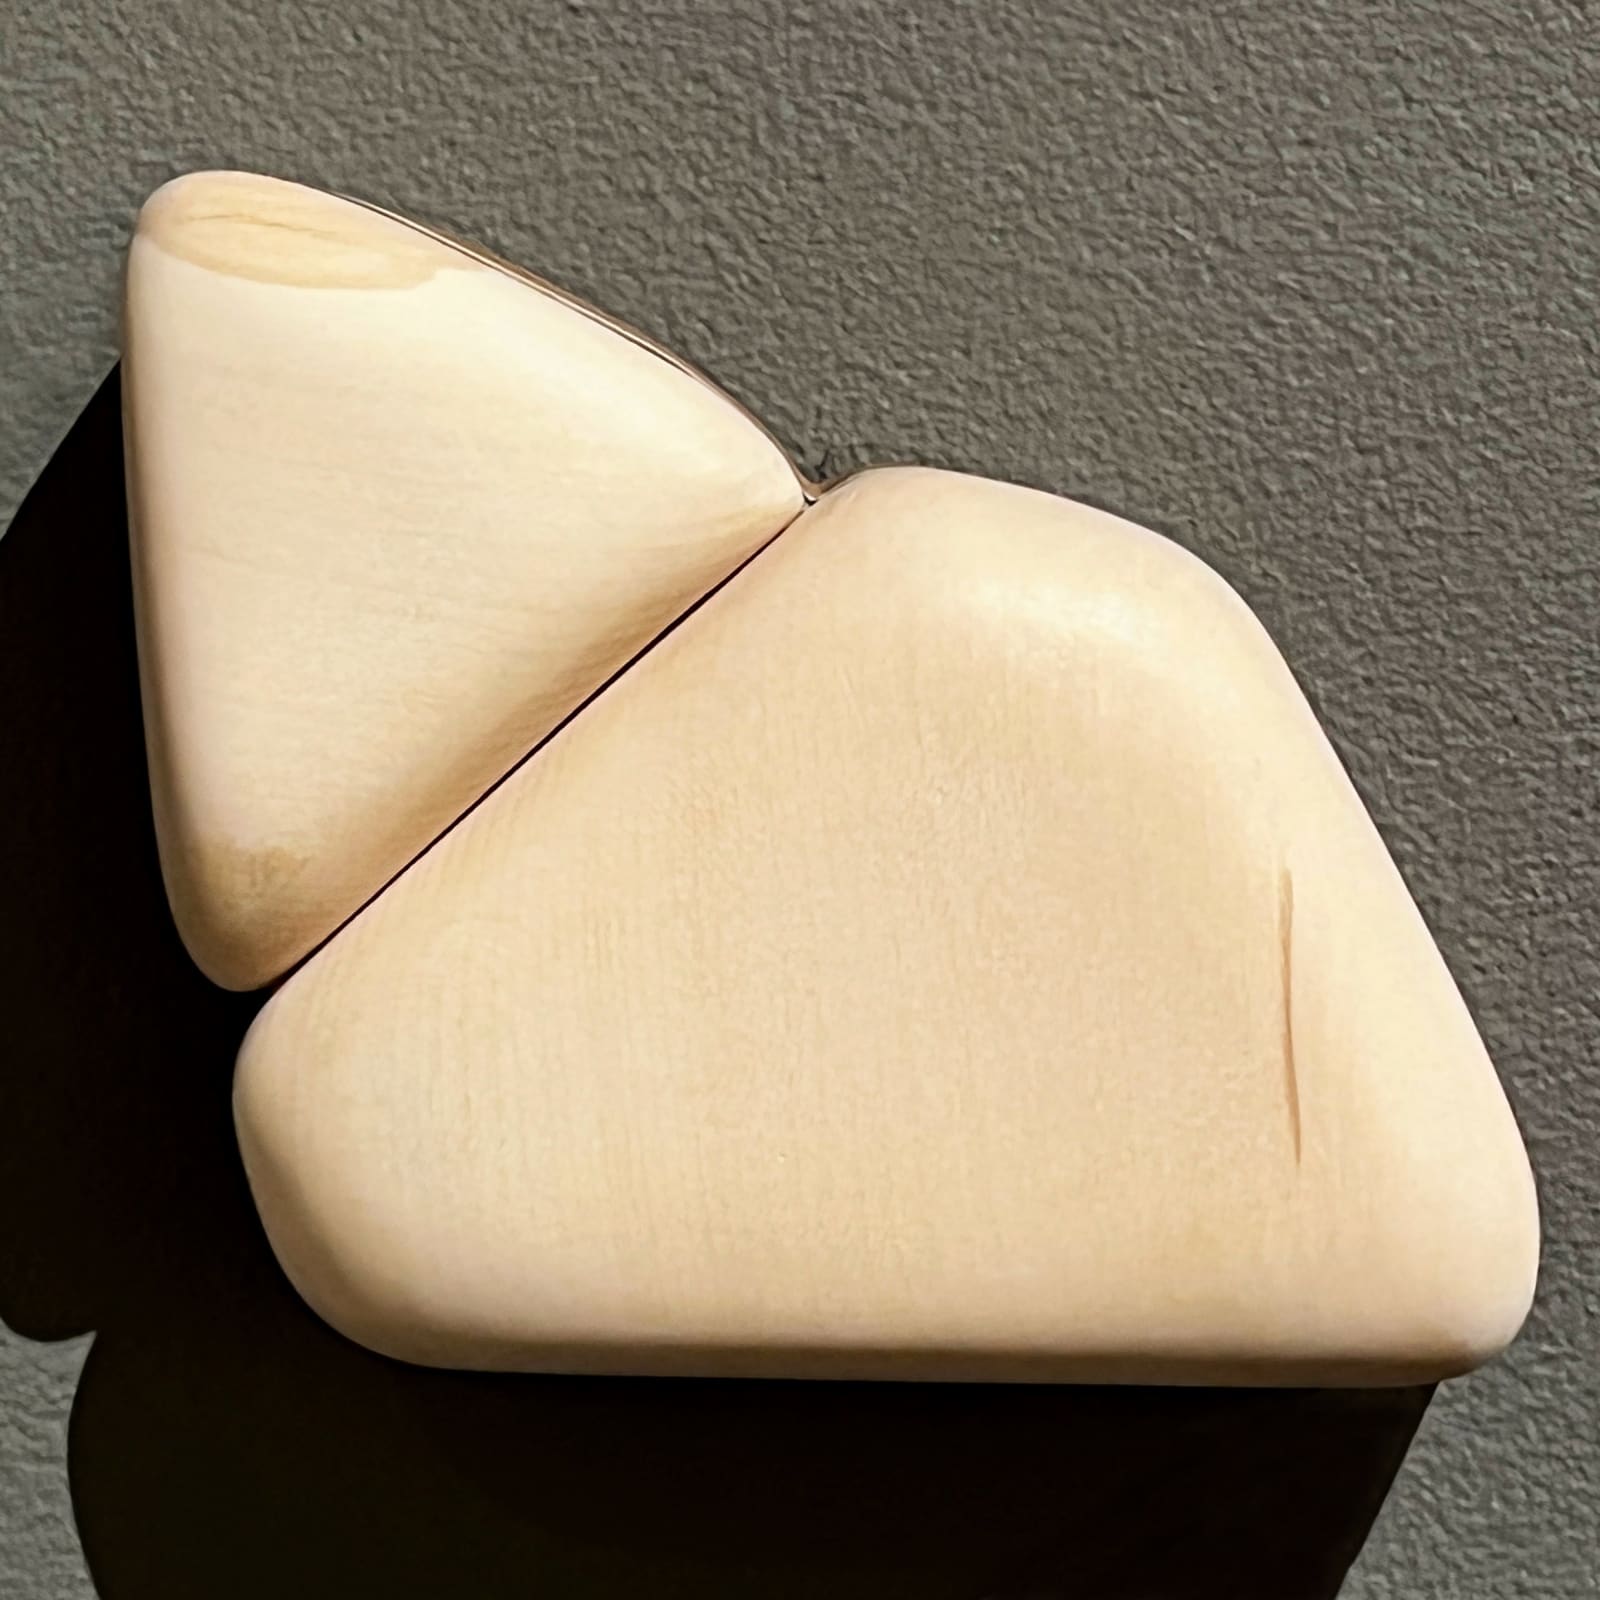 Untitled, 2022 Carved wood and stacked paper 3 3/4 x 4 1/4 x 1 1/4 in. (9.5 x 10.8 x 3.2 cm.) (KBB 16) $3,000